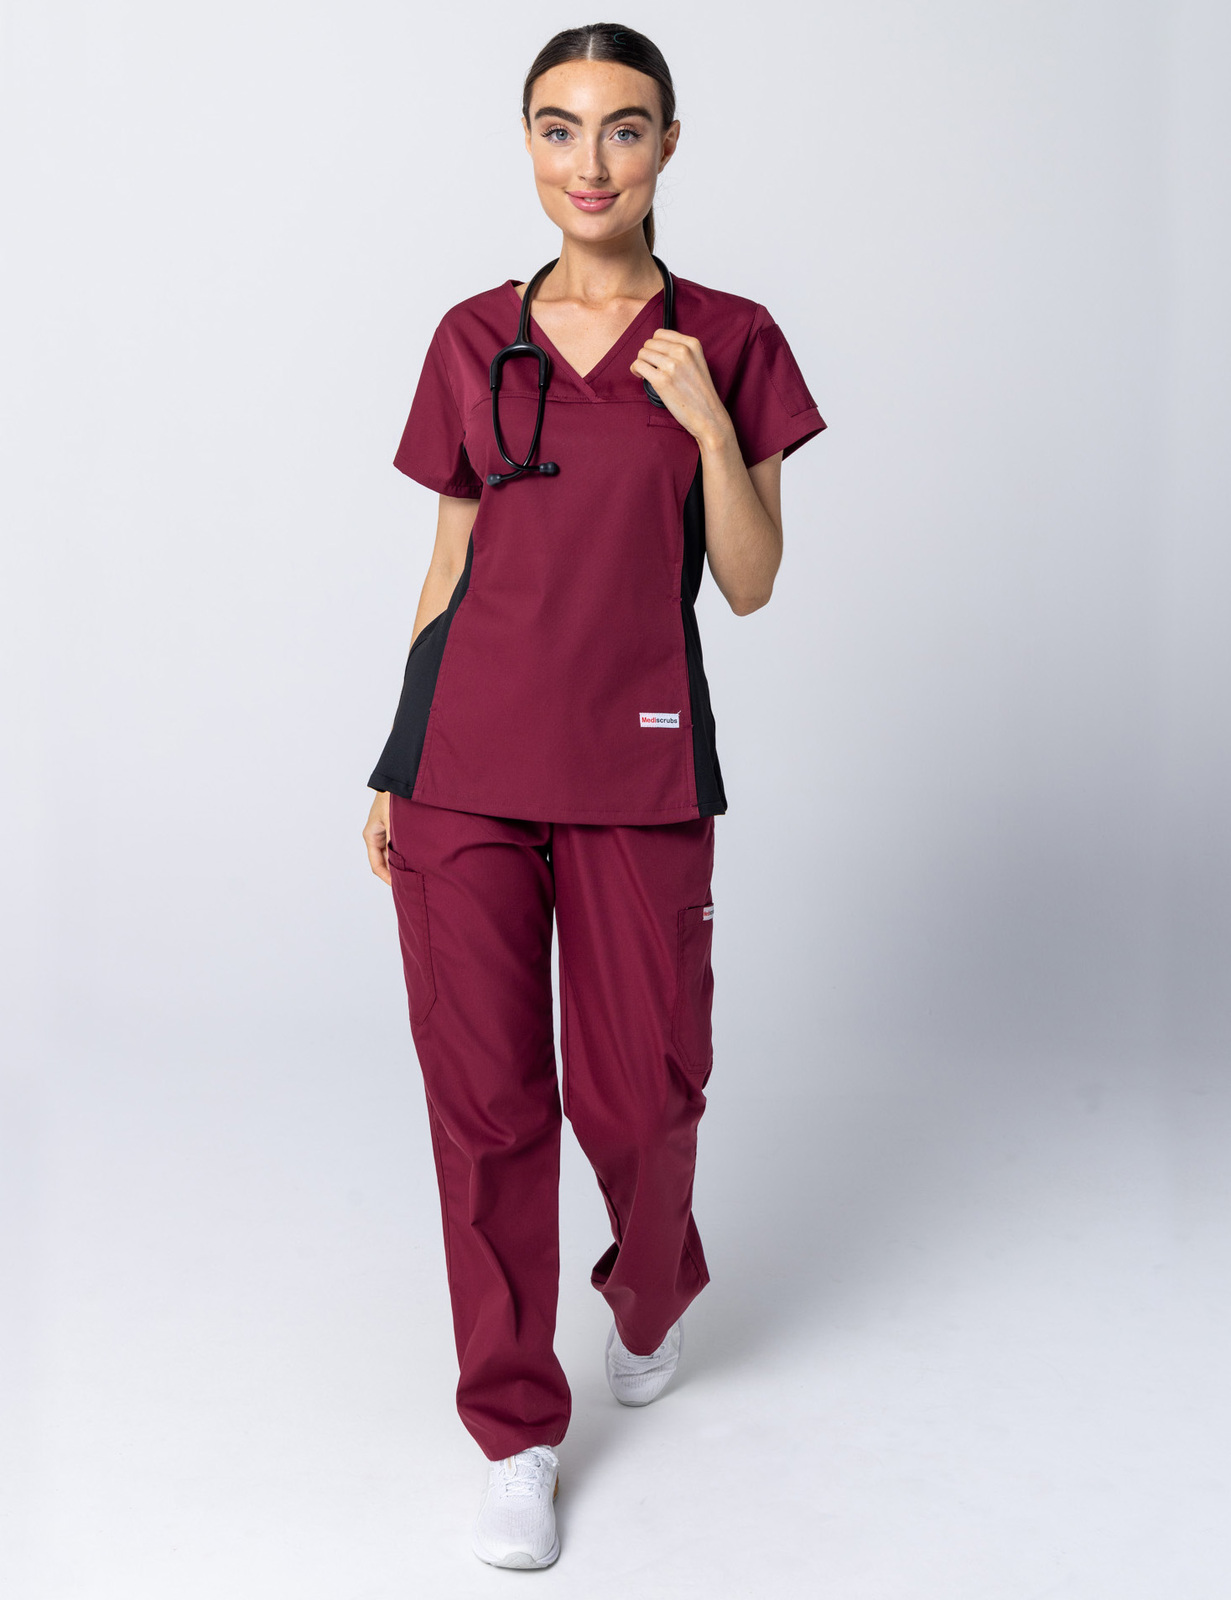 Women's Fit Solid Scrub Top With Spandex Panel - Burgundy - Small